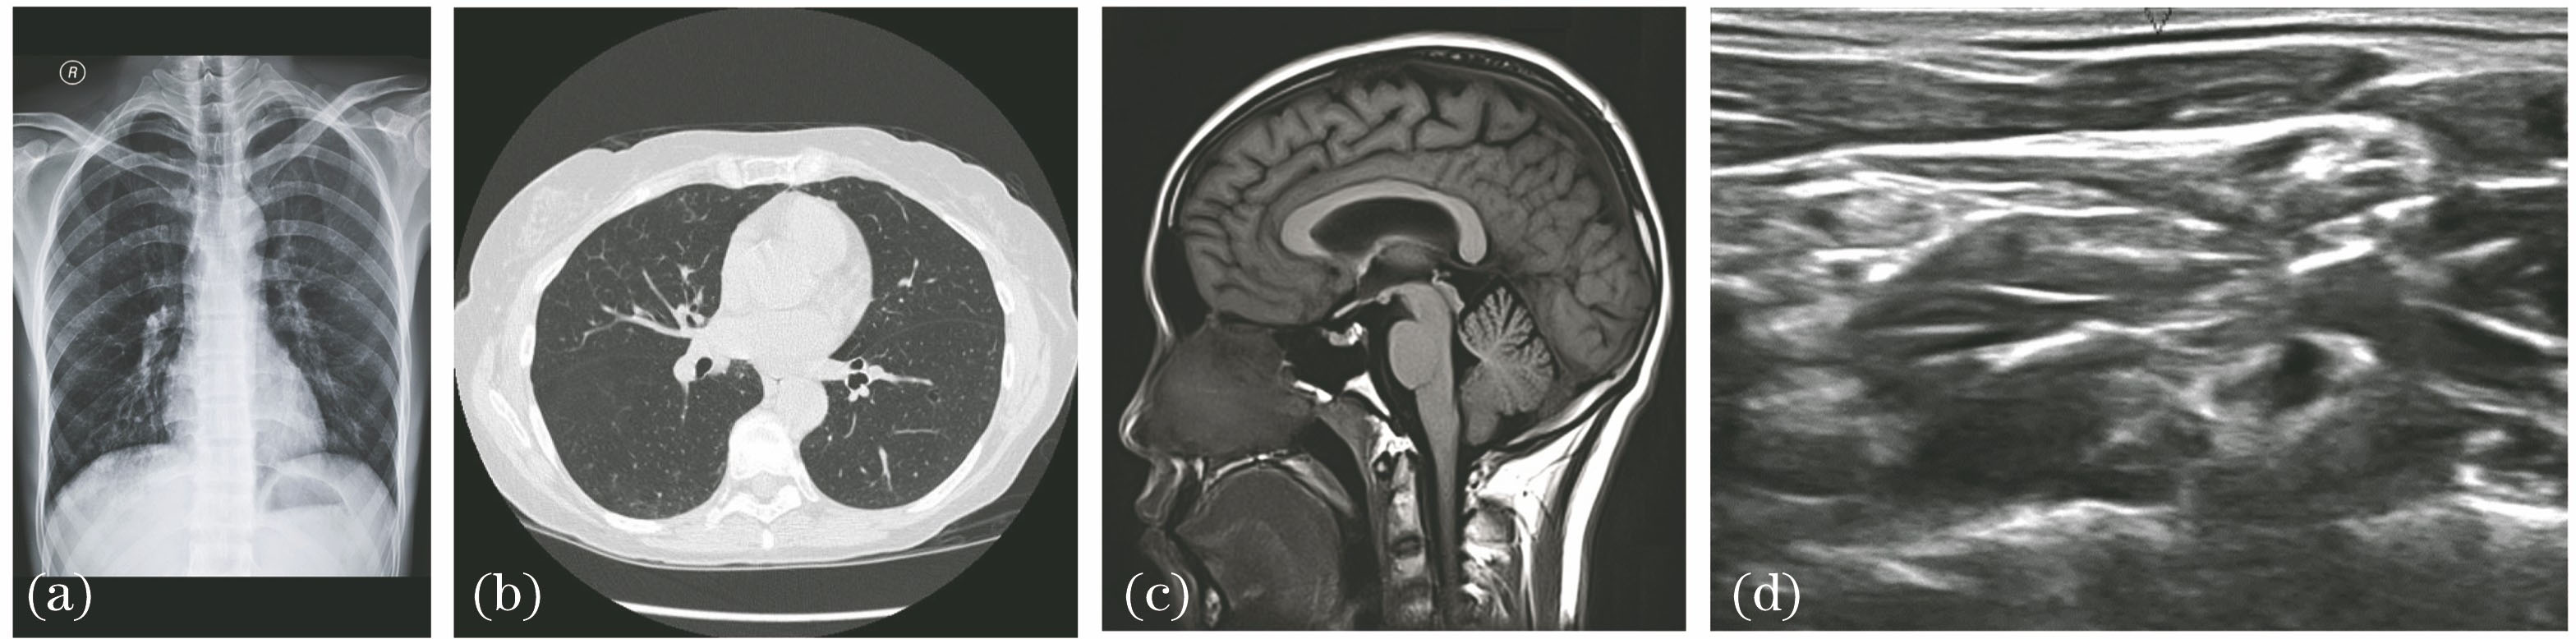 Images of typical medical. (a) X-ray image; (b) CT image; (c) MR image; (d) UI